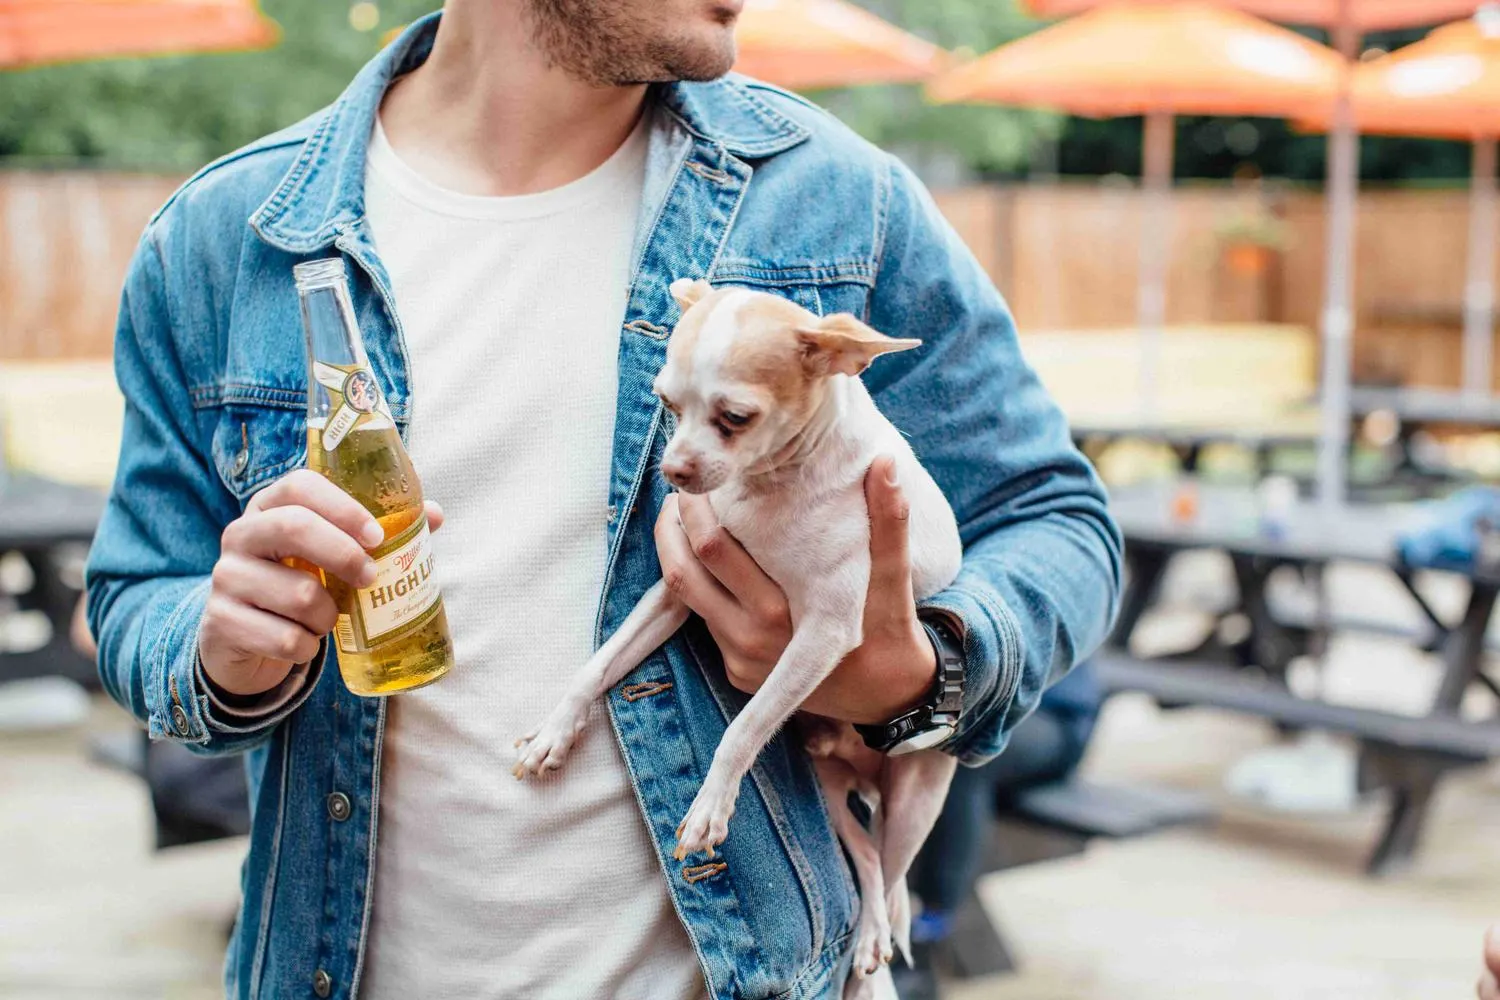 Dog owner holding small dog on patio